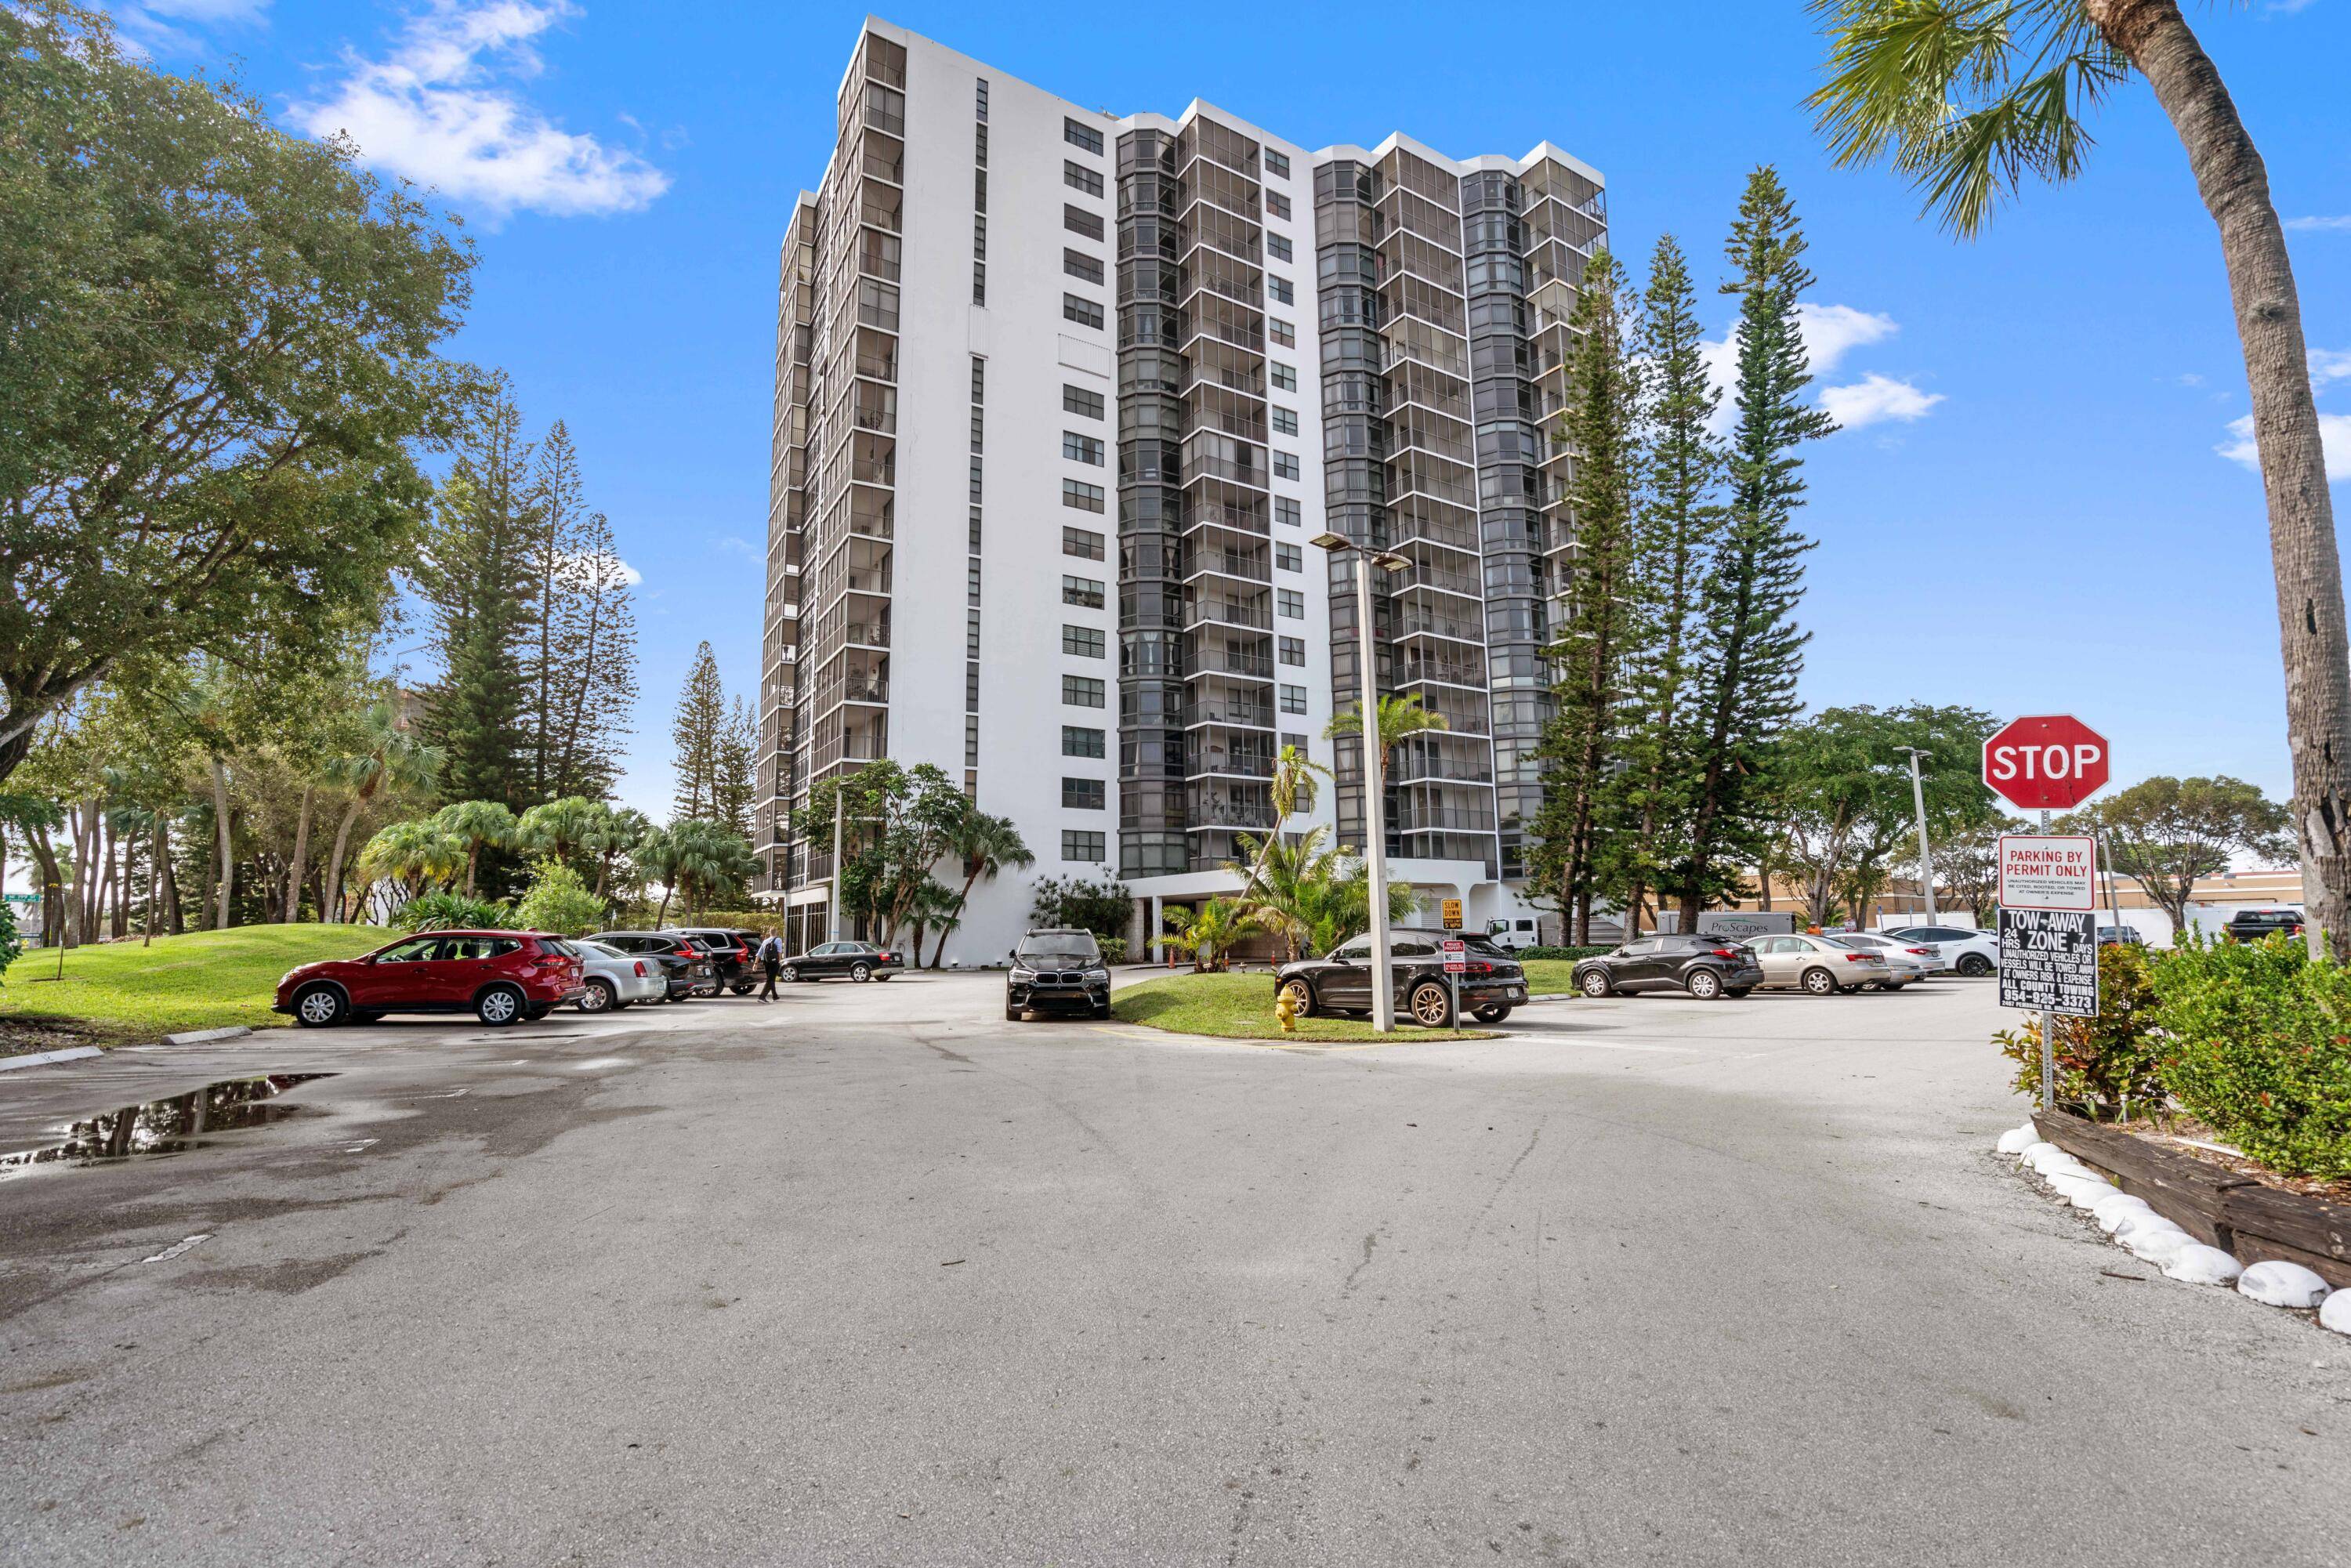 LOCATION, LOCATION, LOCATION Walking distance to Aventura Mall and worship.